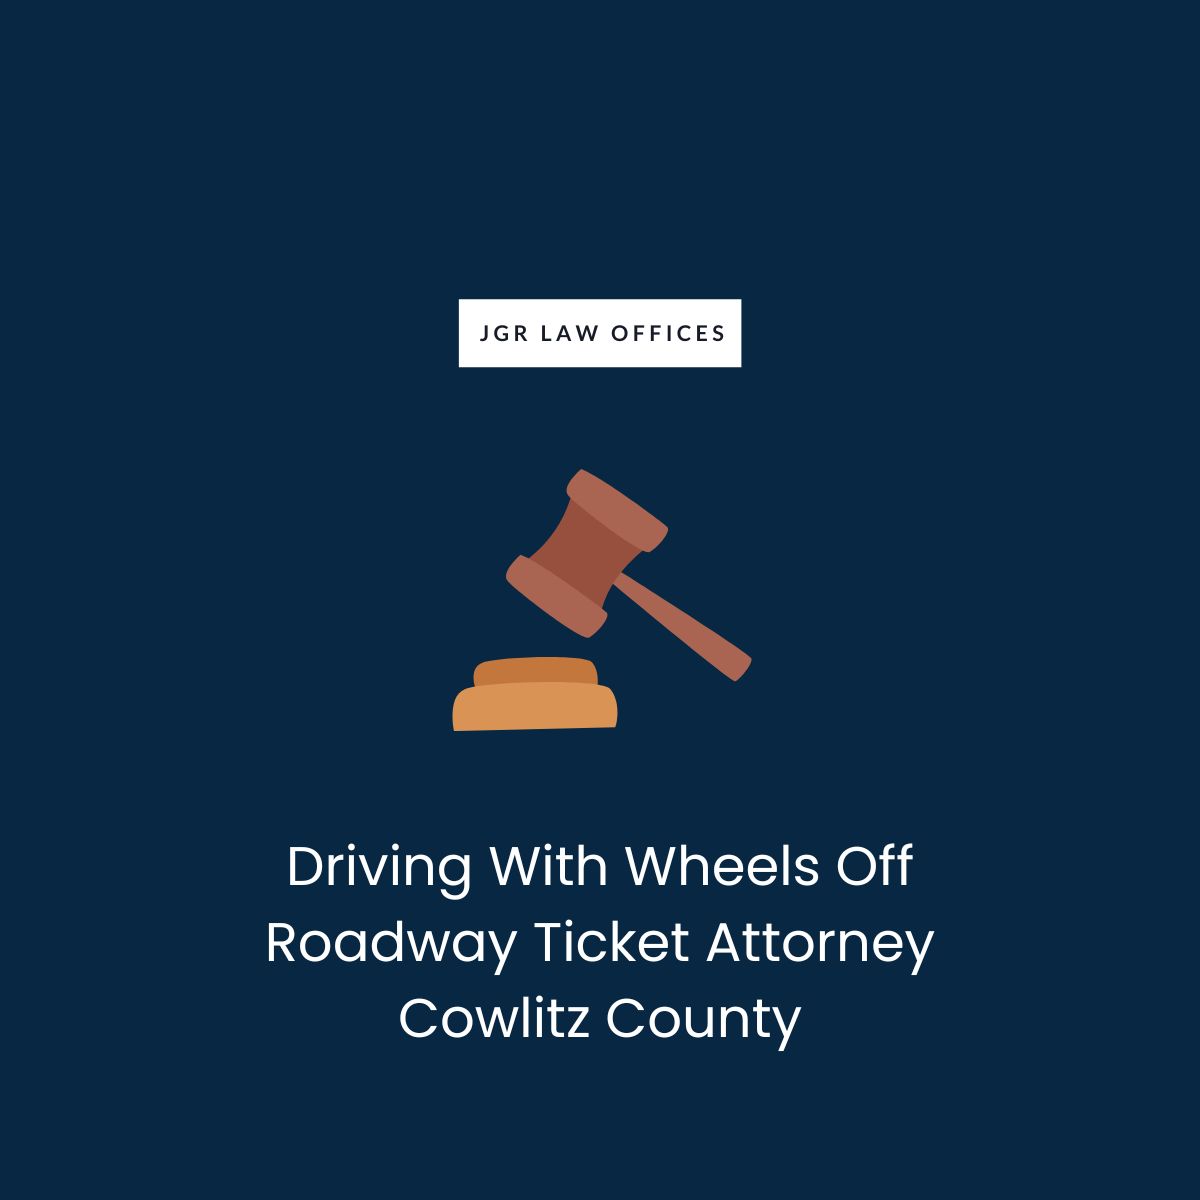 Driving With Wheels Off Roadway Ticket Attorney Cowlitz County